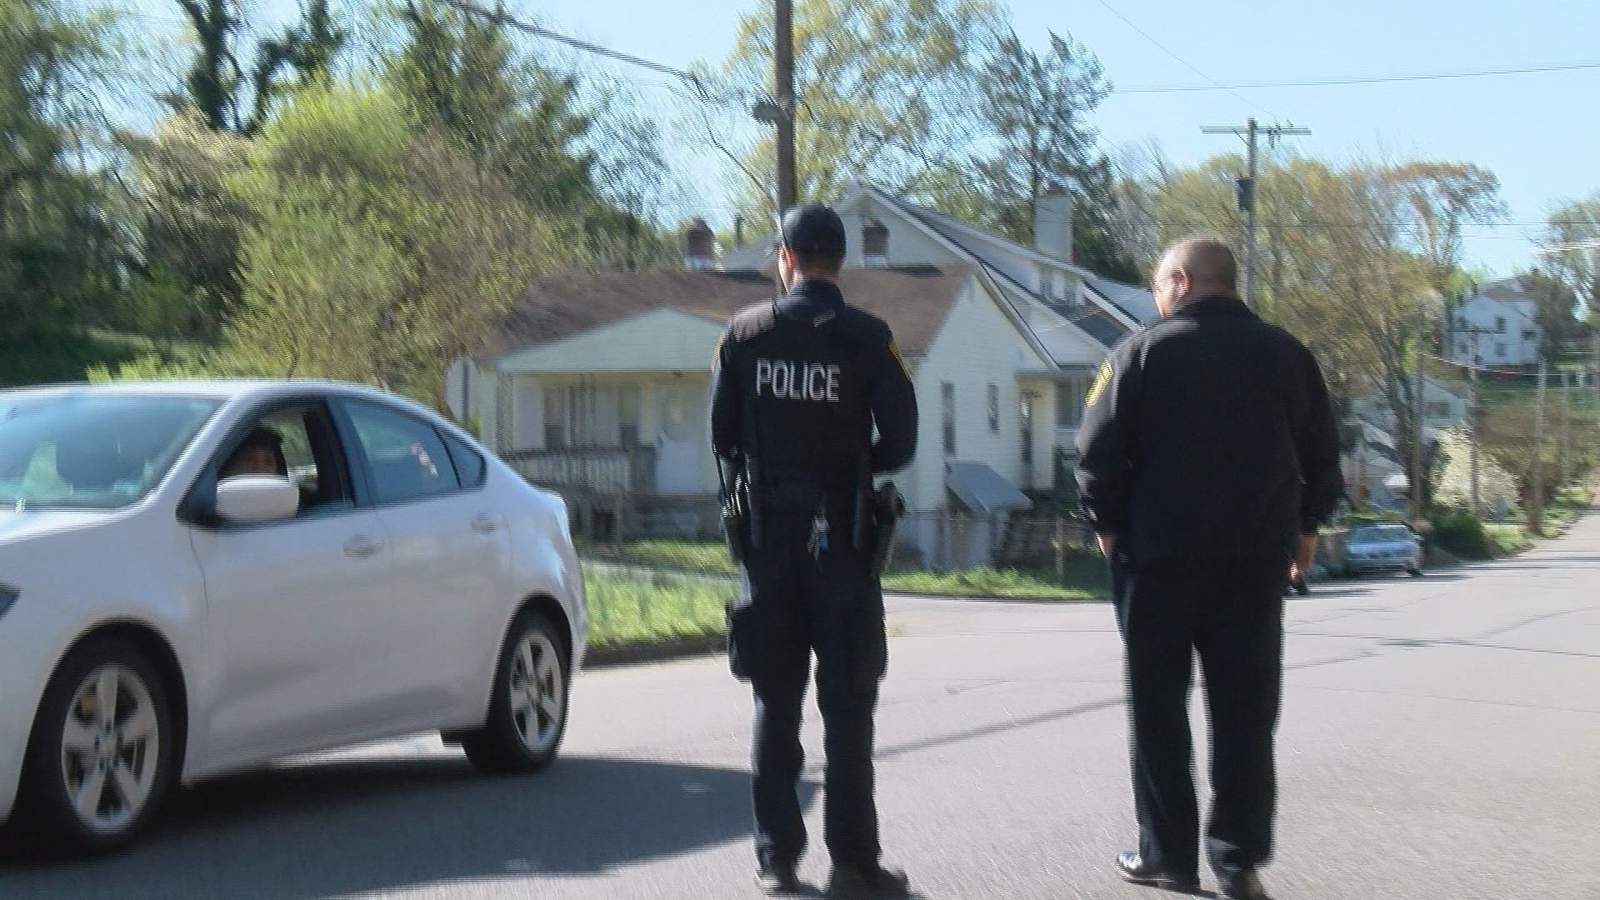 'We’re here to help’: Martinsville police officers start COVID-19 community walks